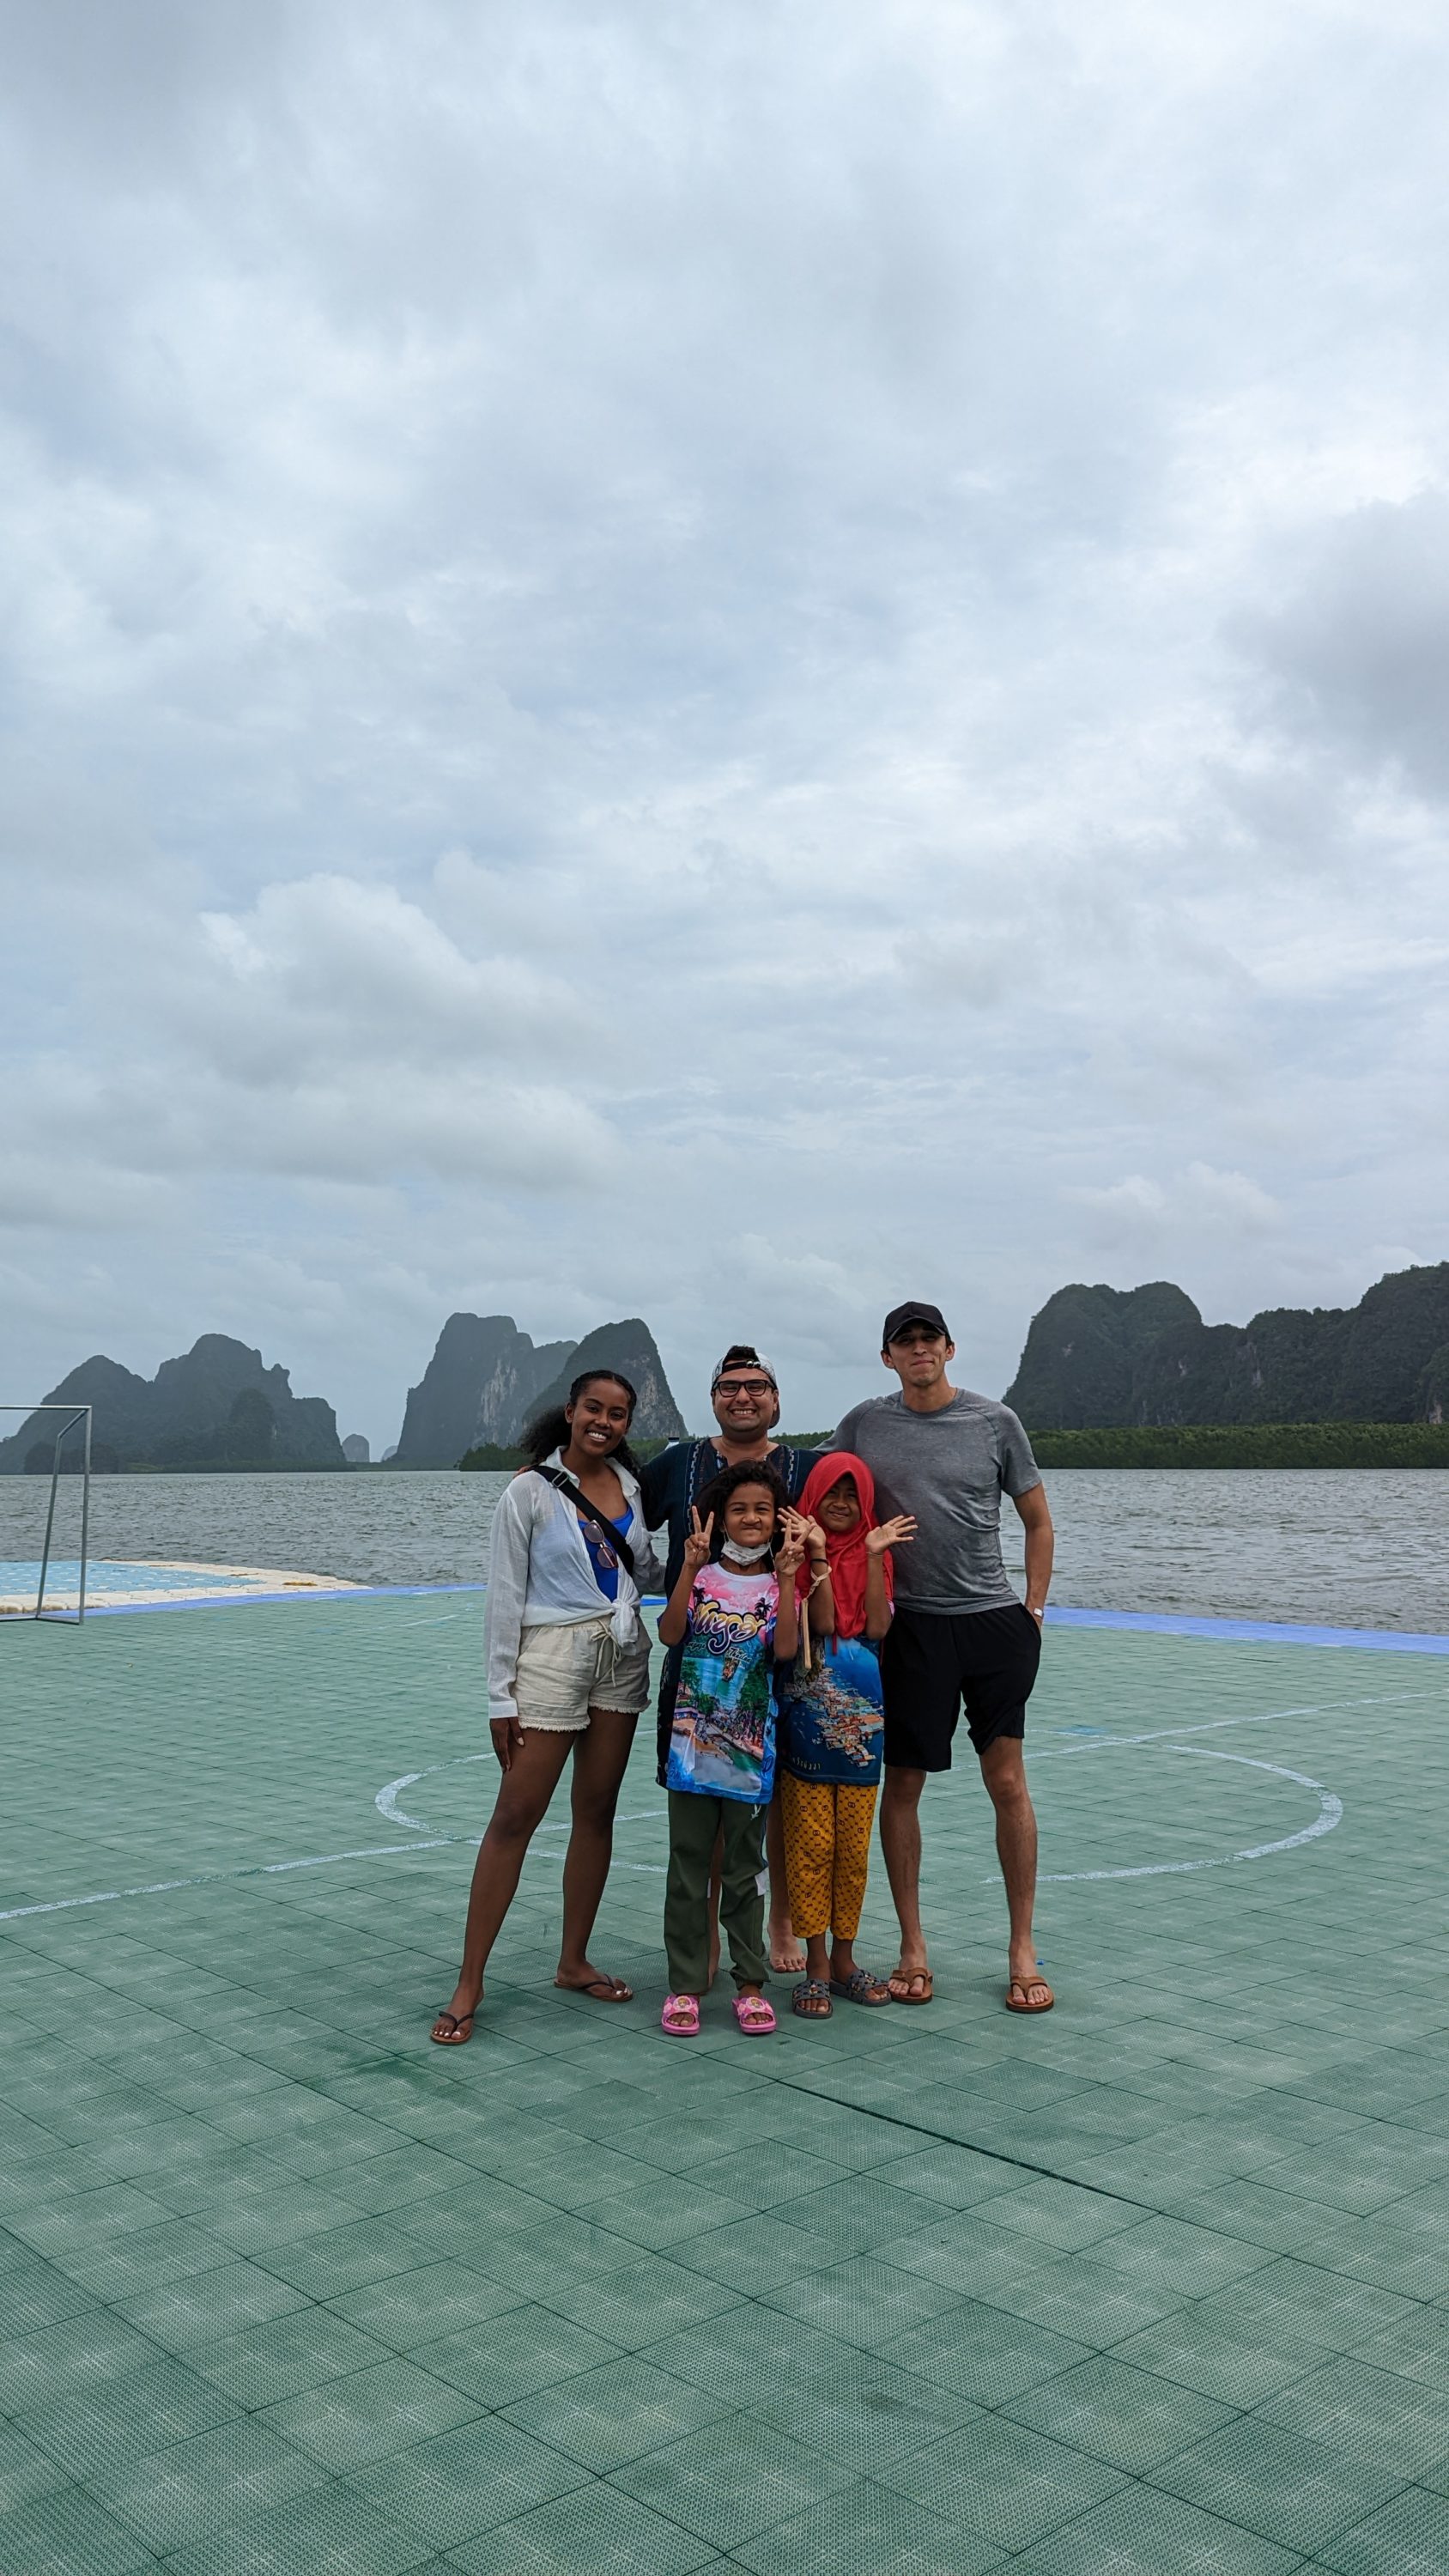 Kids took us to a floating soccer field